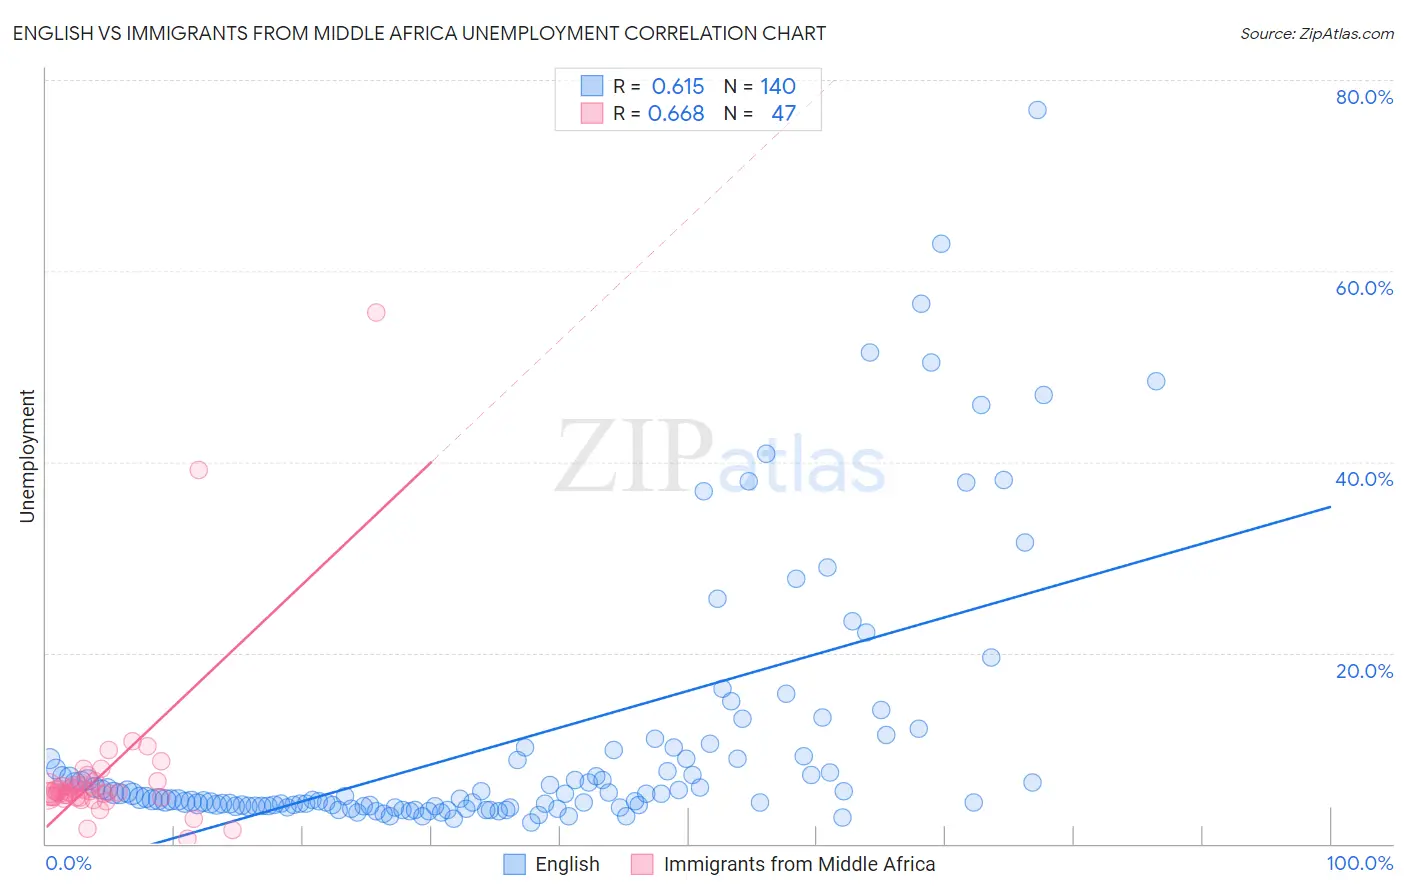 English vs Immigrants from Middle Africa Unemployment